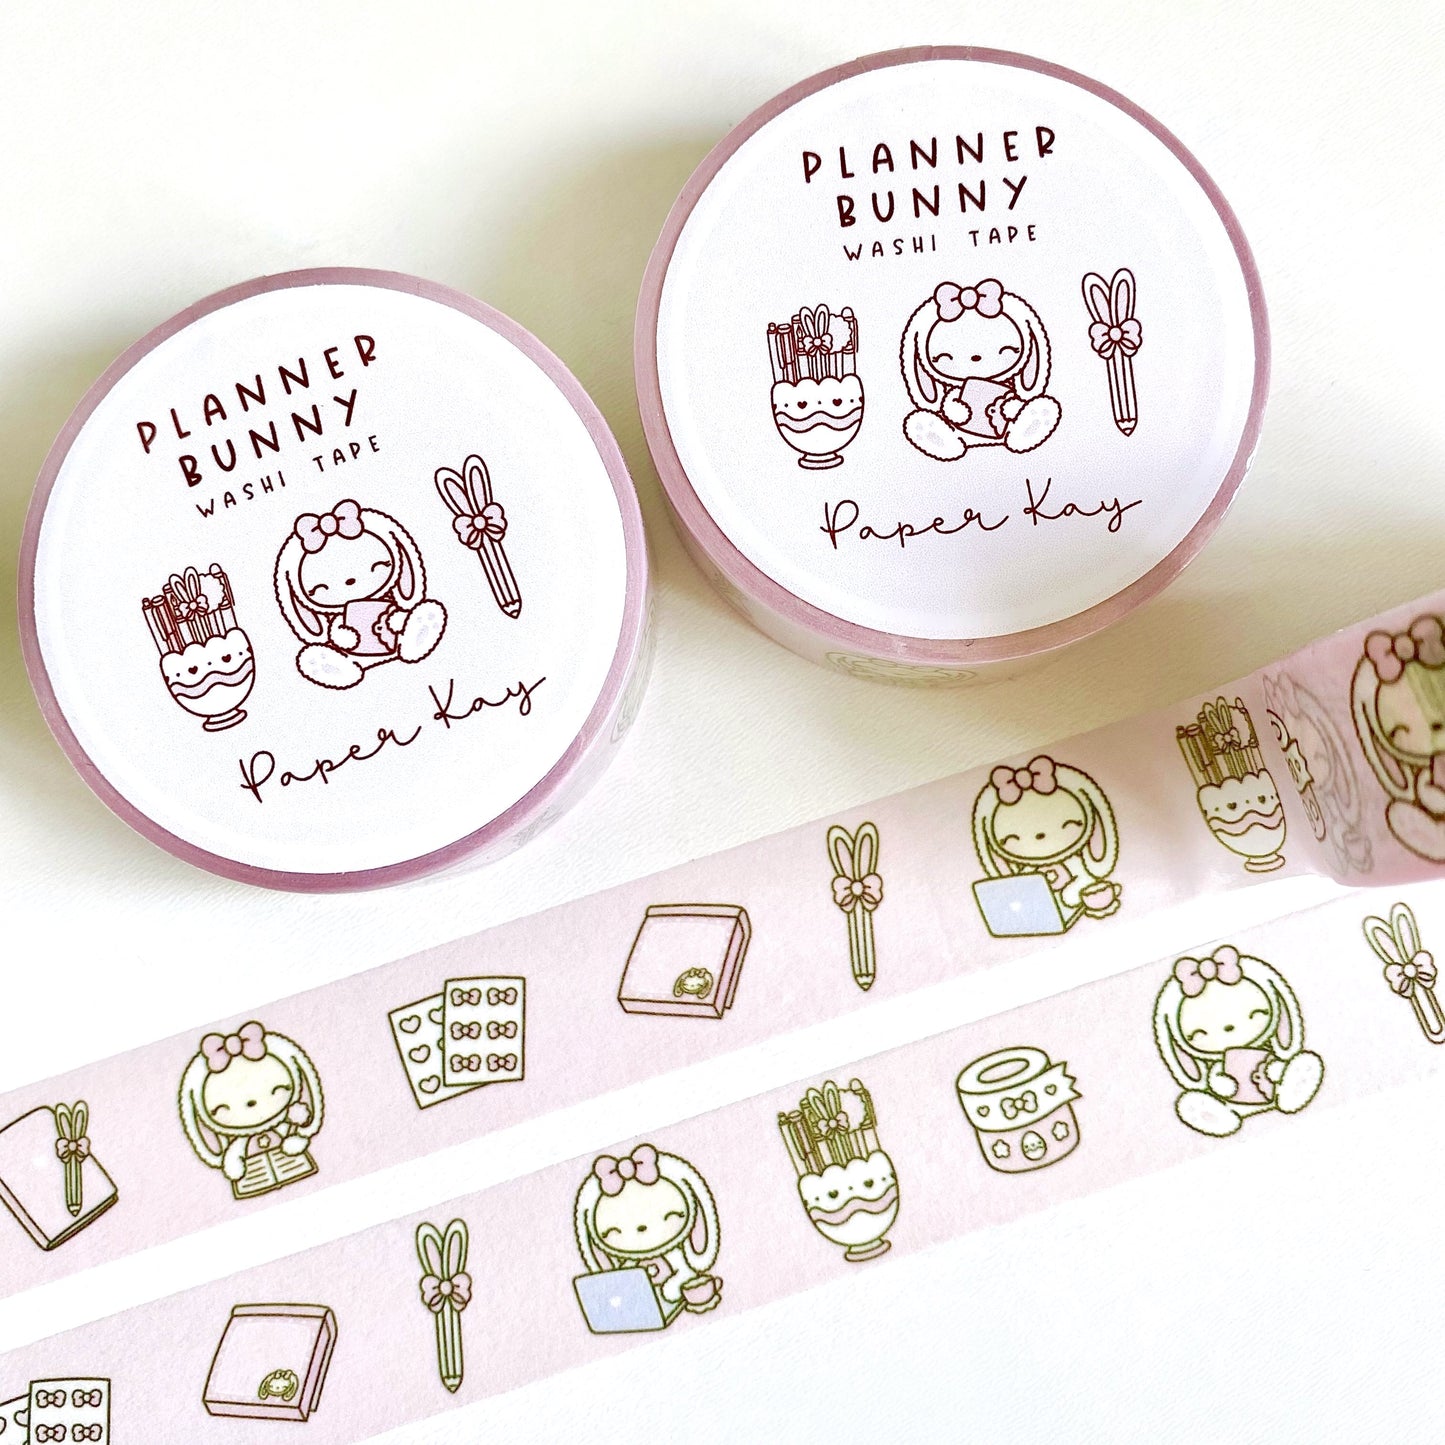 Planner Bunny Washi Tape